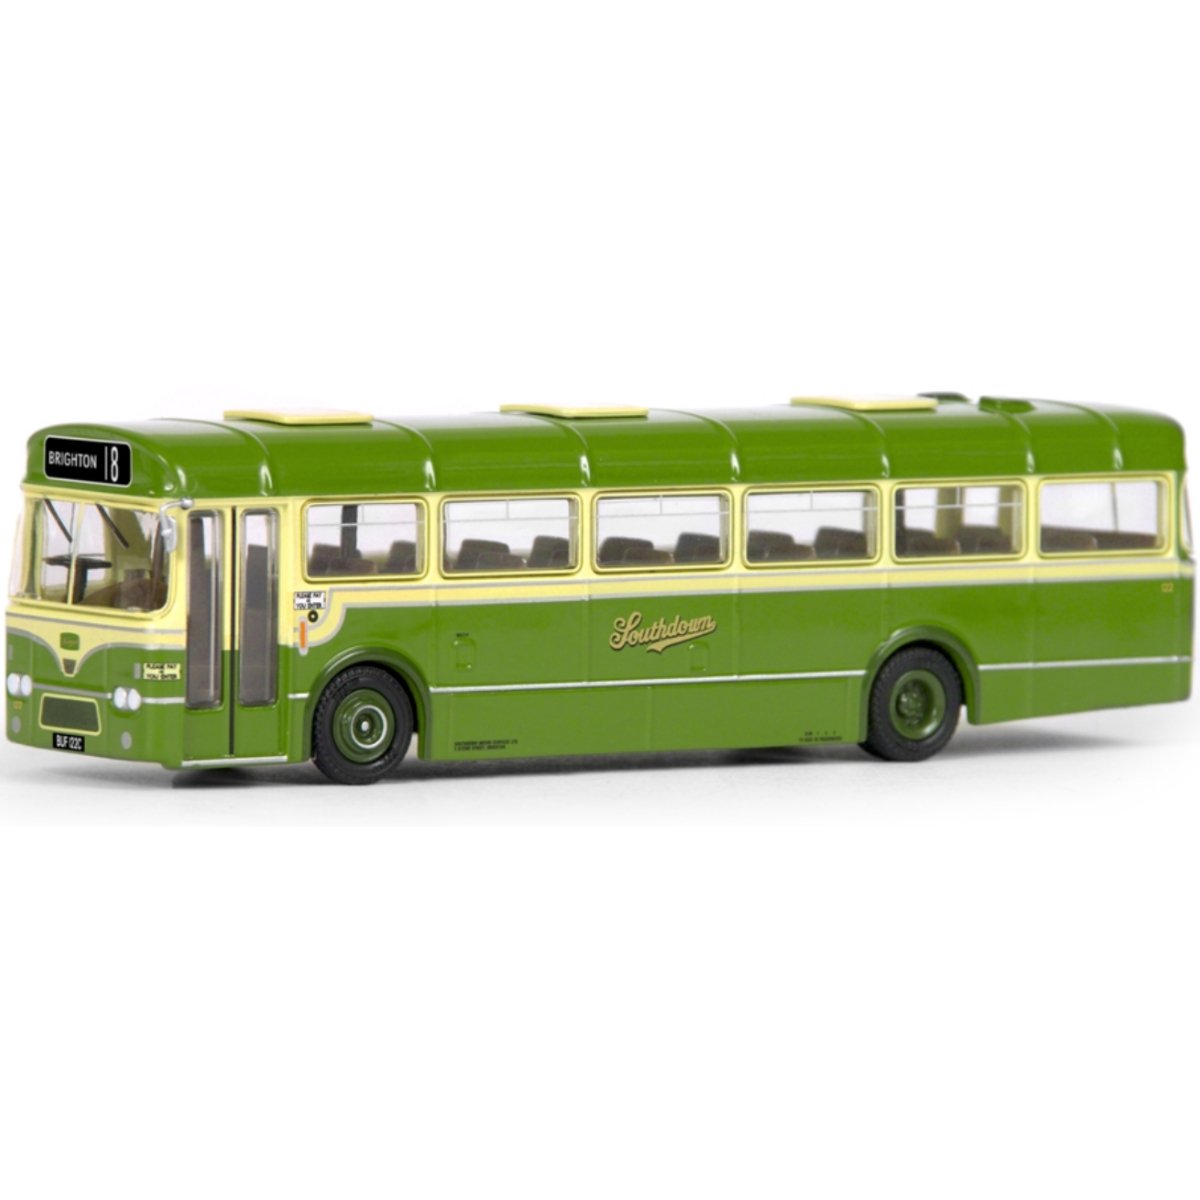 EFE BET 6 Bay Leyland Leopard 100th Anniversary Southdown - Phillips Hobbies